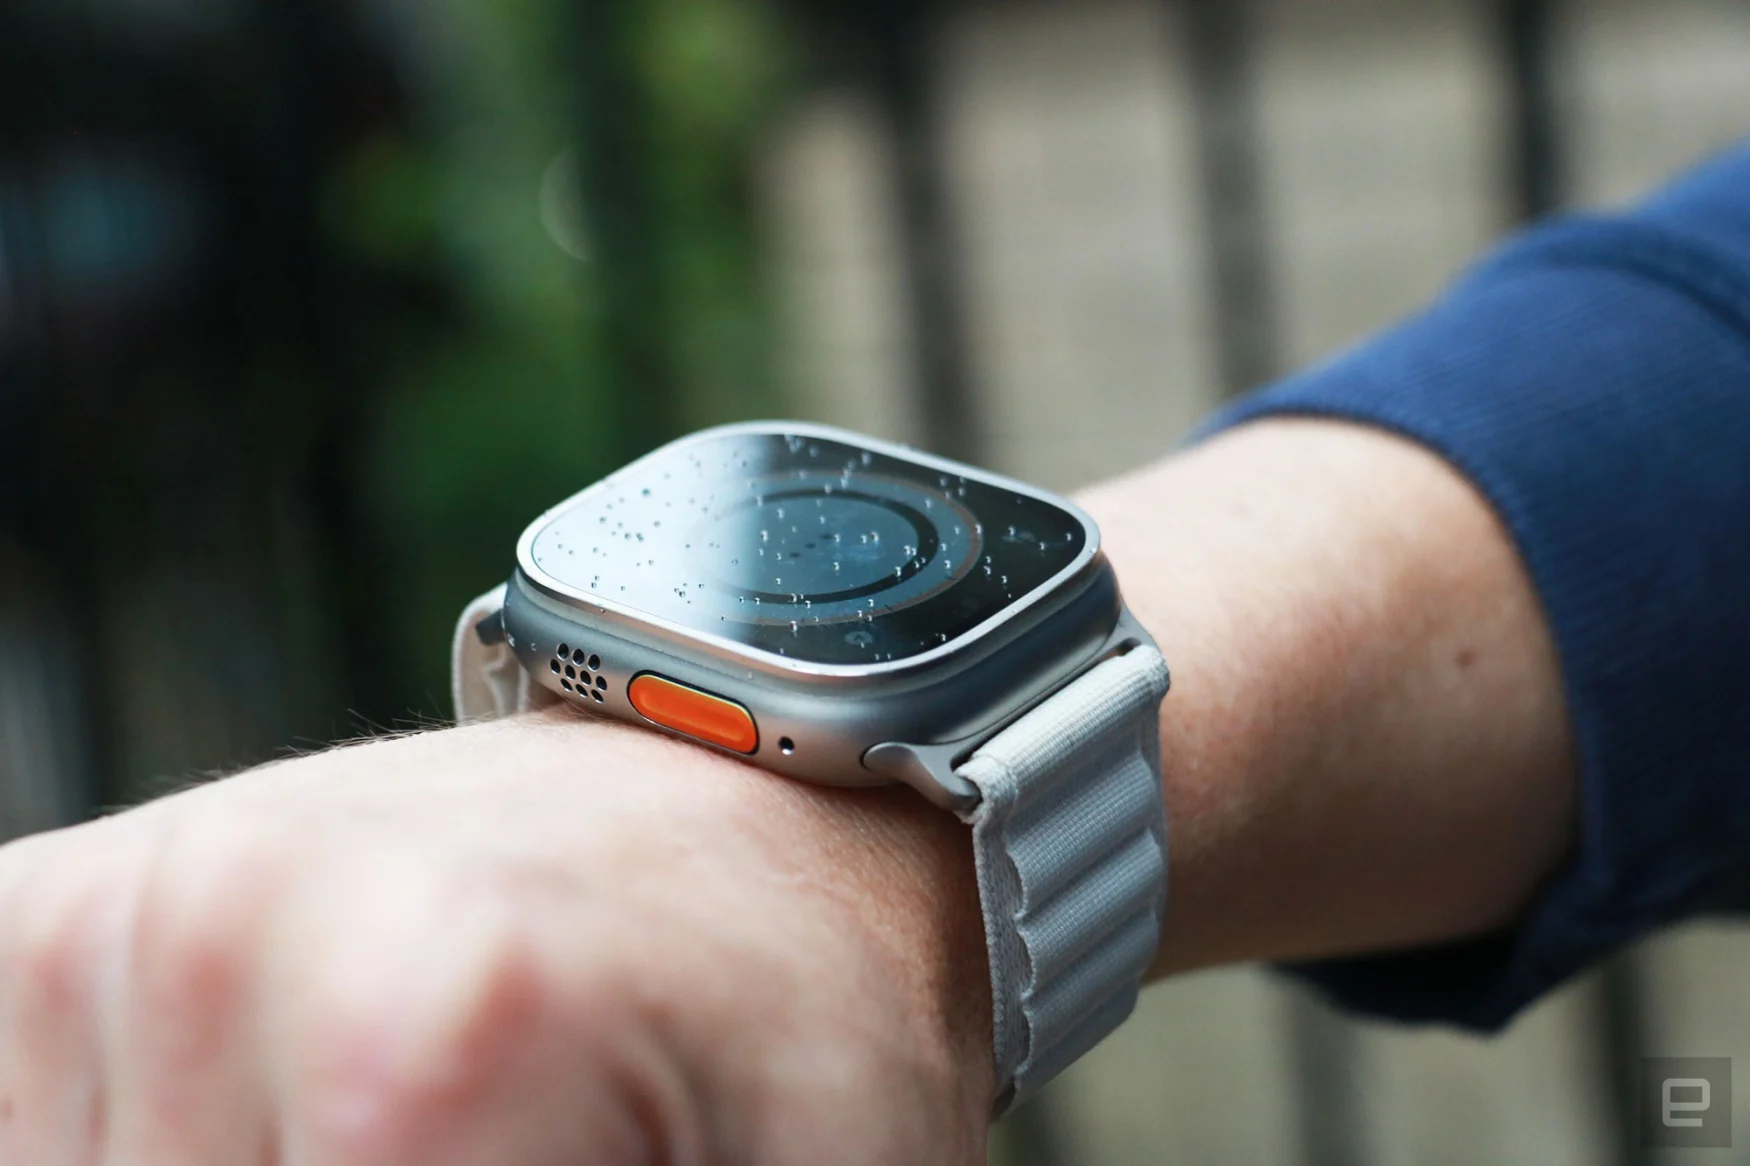 Apple Watch Ultra review: A big smartwatch with some little quirks |  Engadget